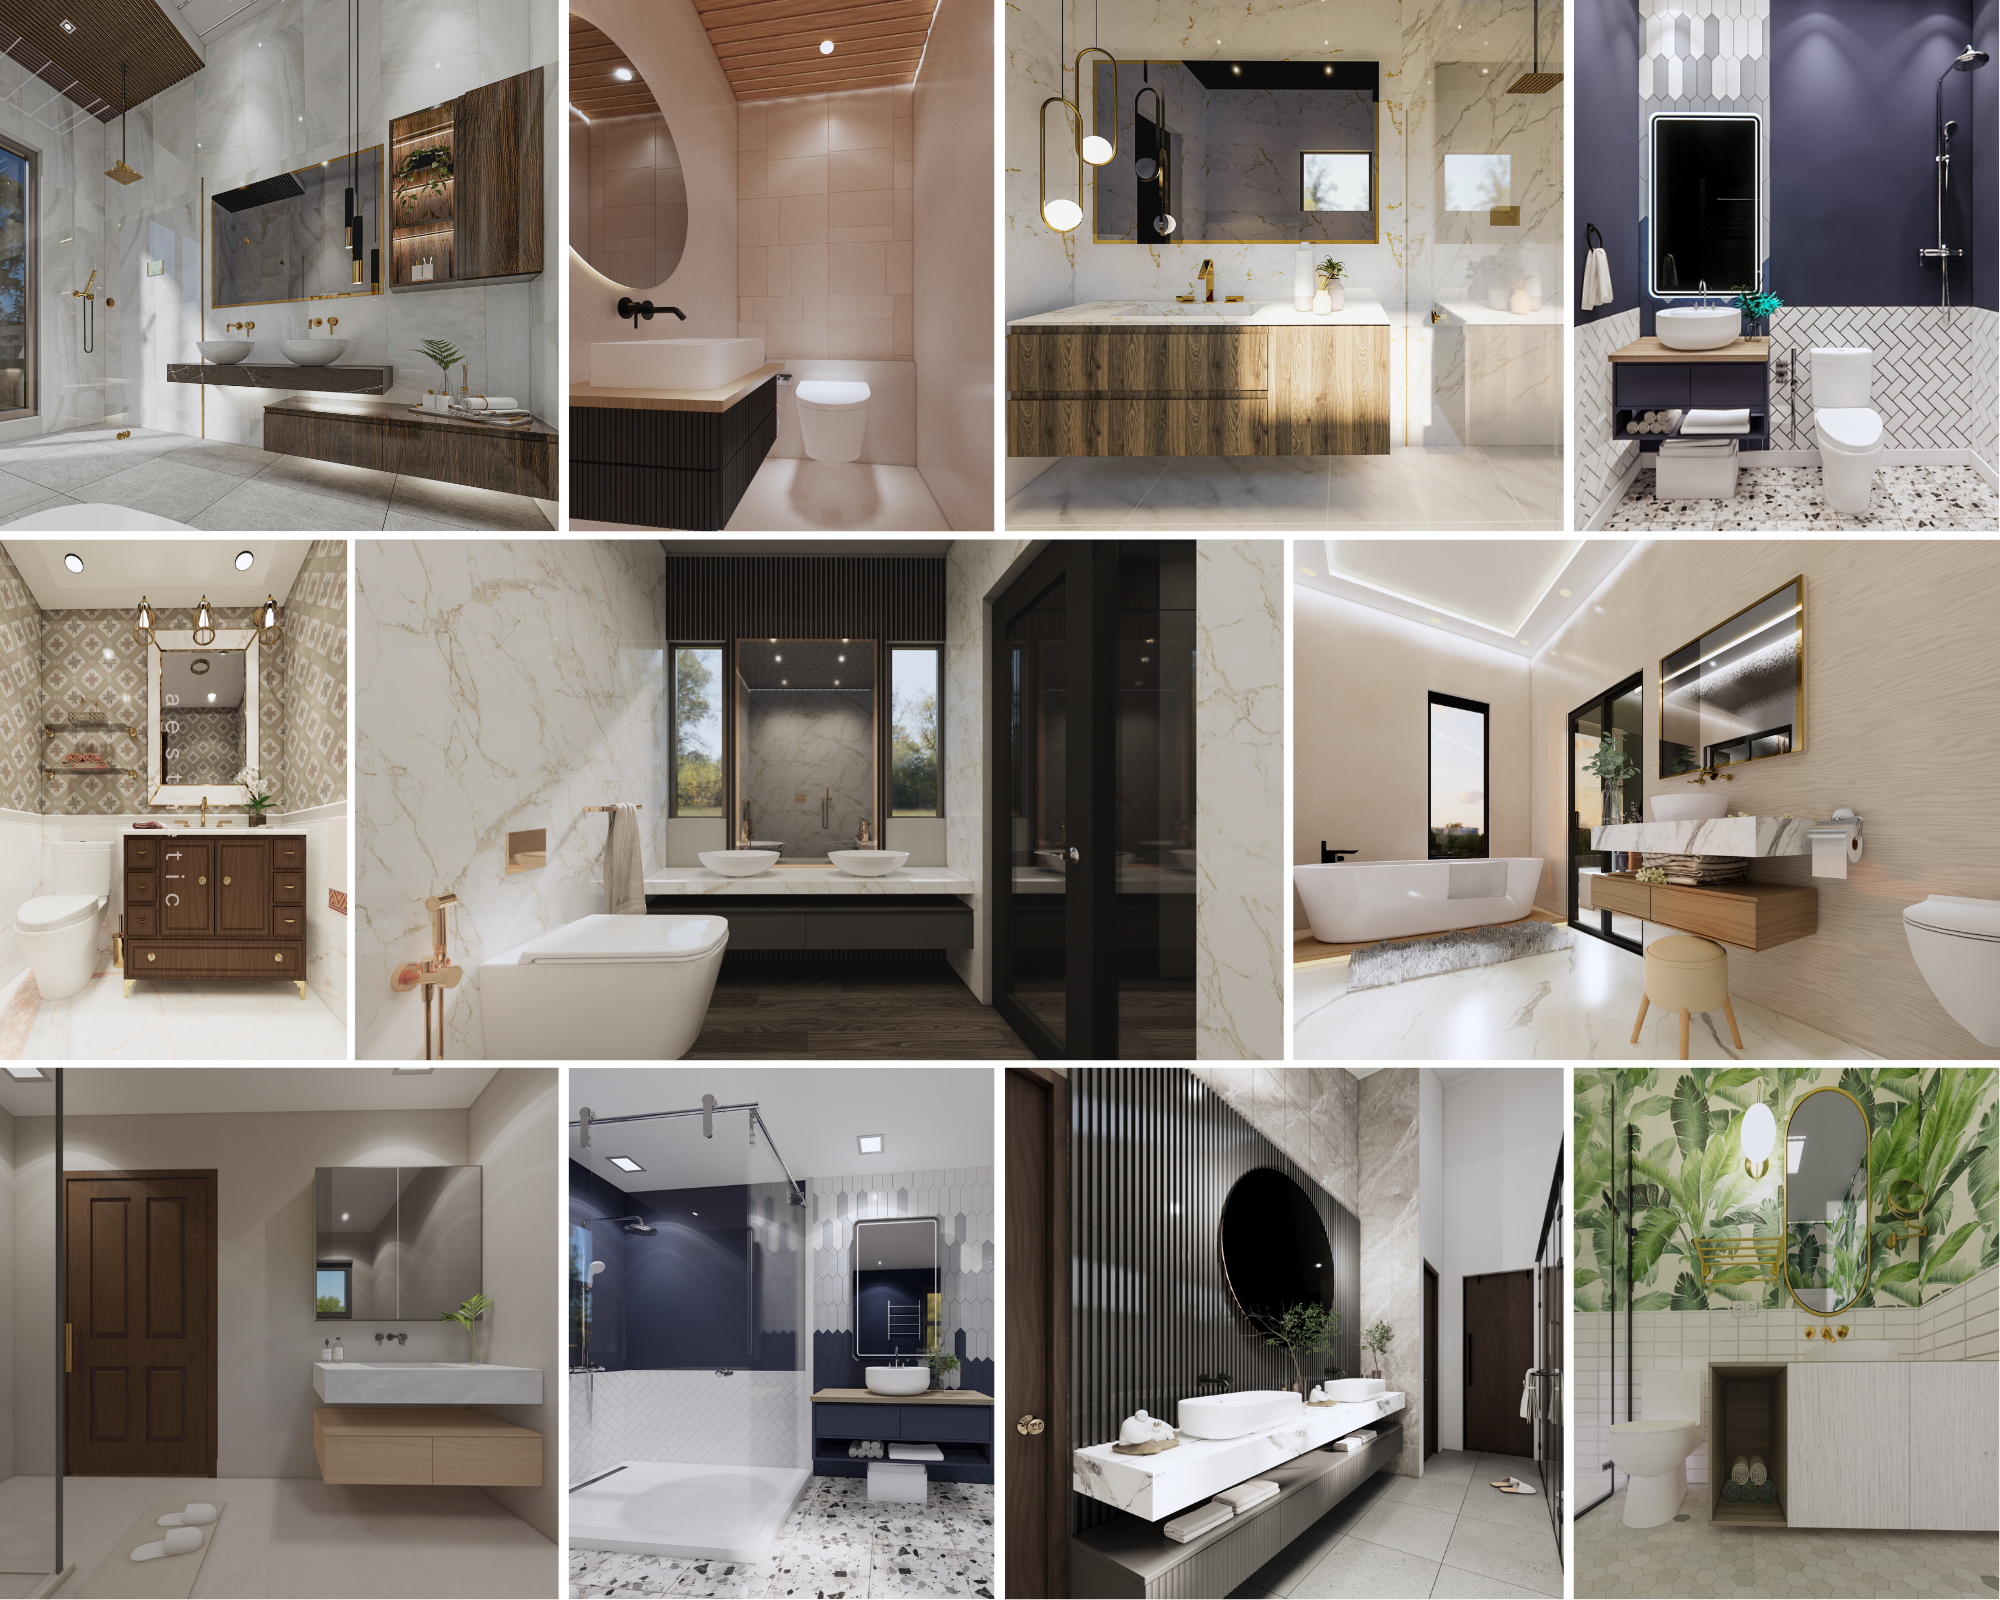 29586I will design bathroom 3d model visualization and render 2d drawings